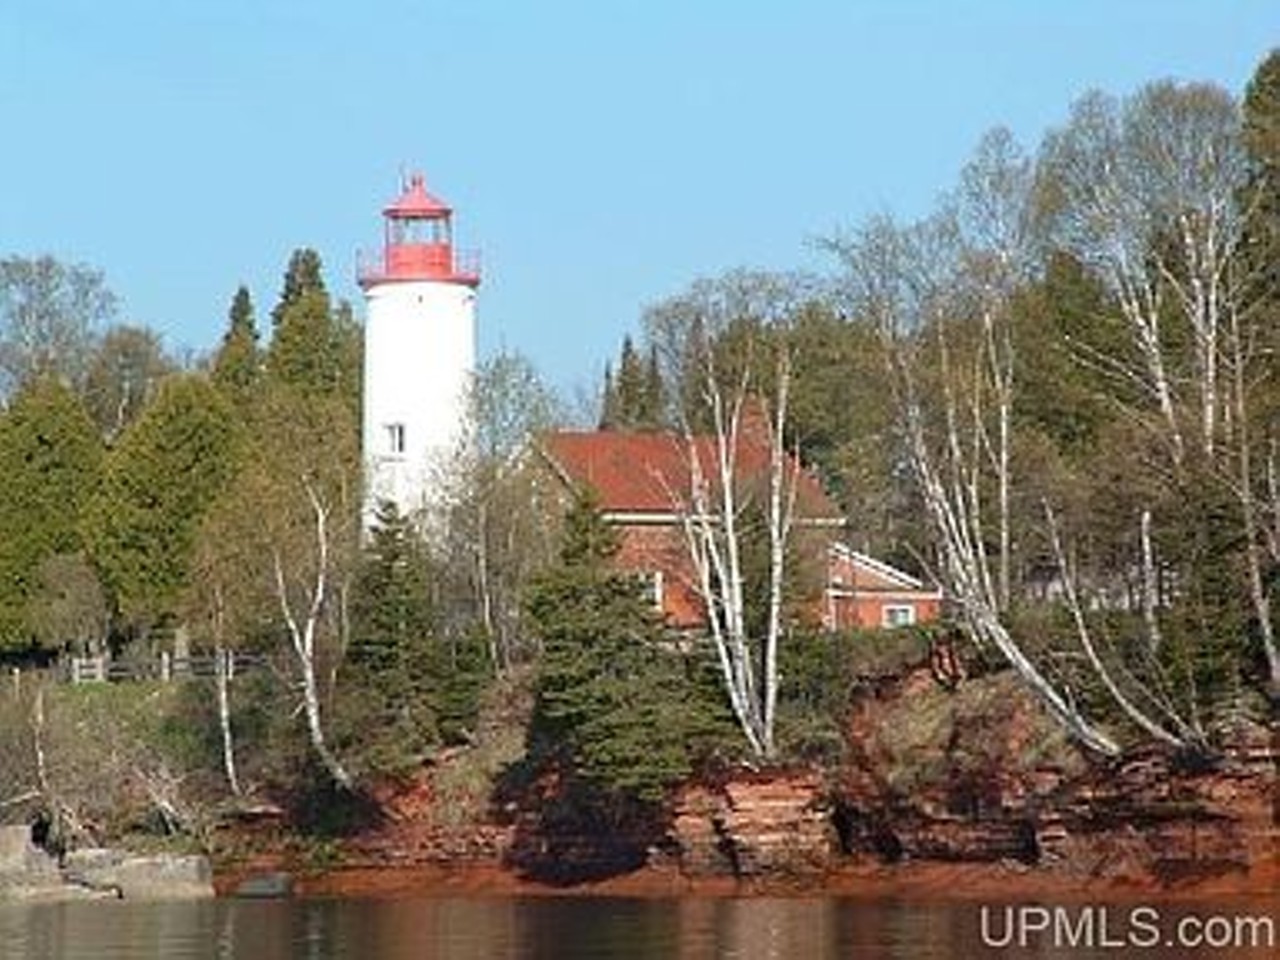 You can actually purchase a renovated 19th-century lighthouse on Lake Superior